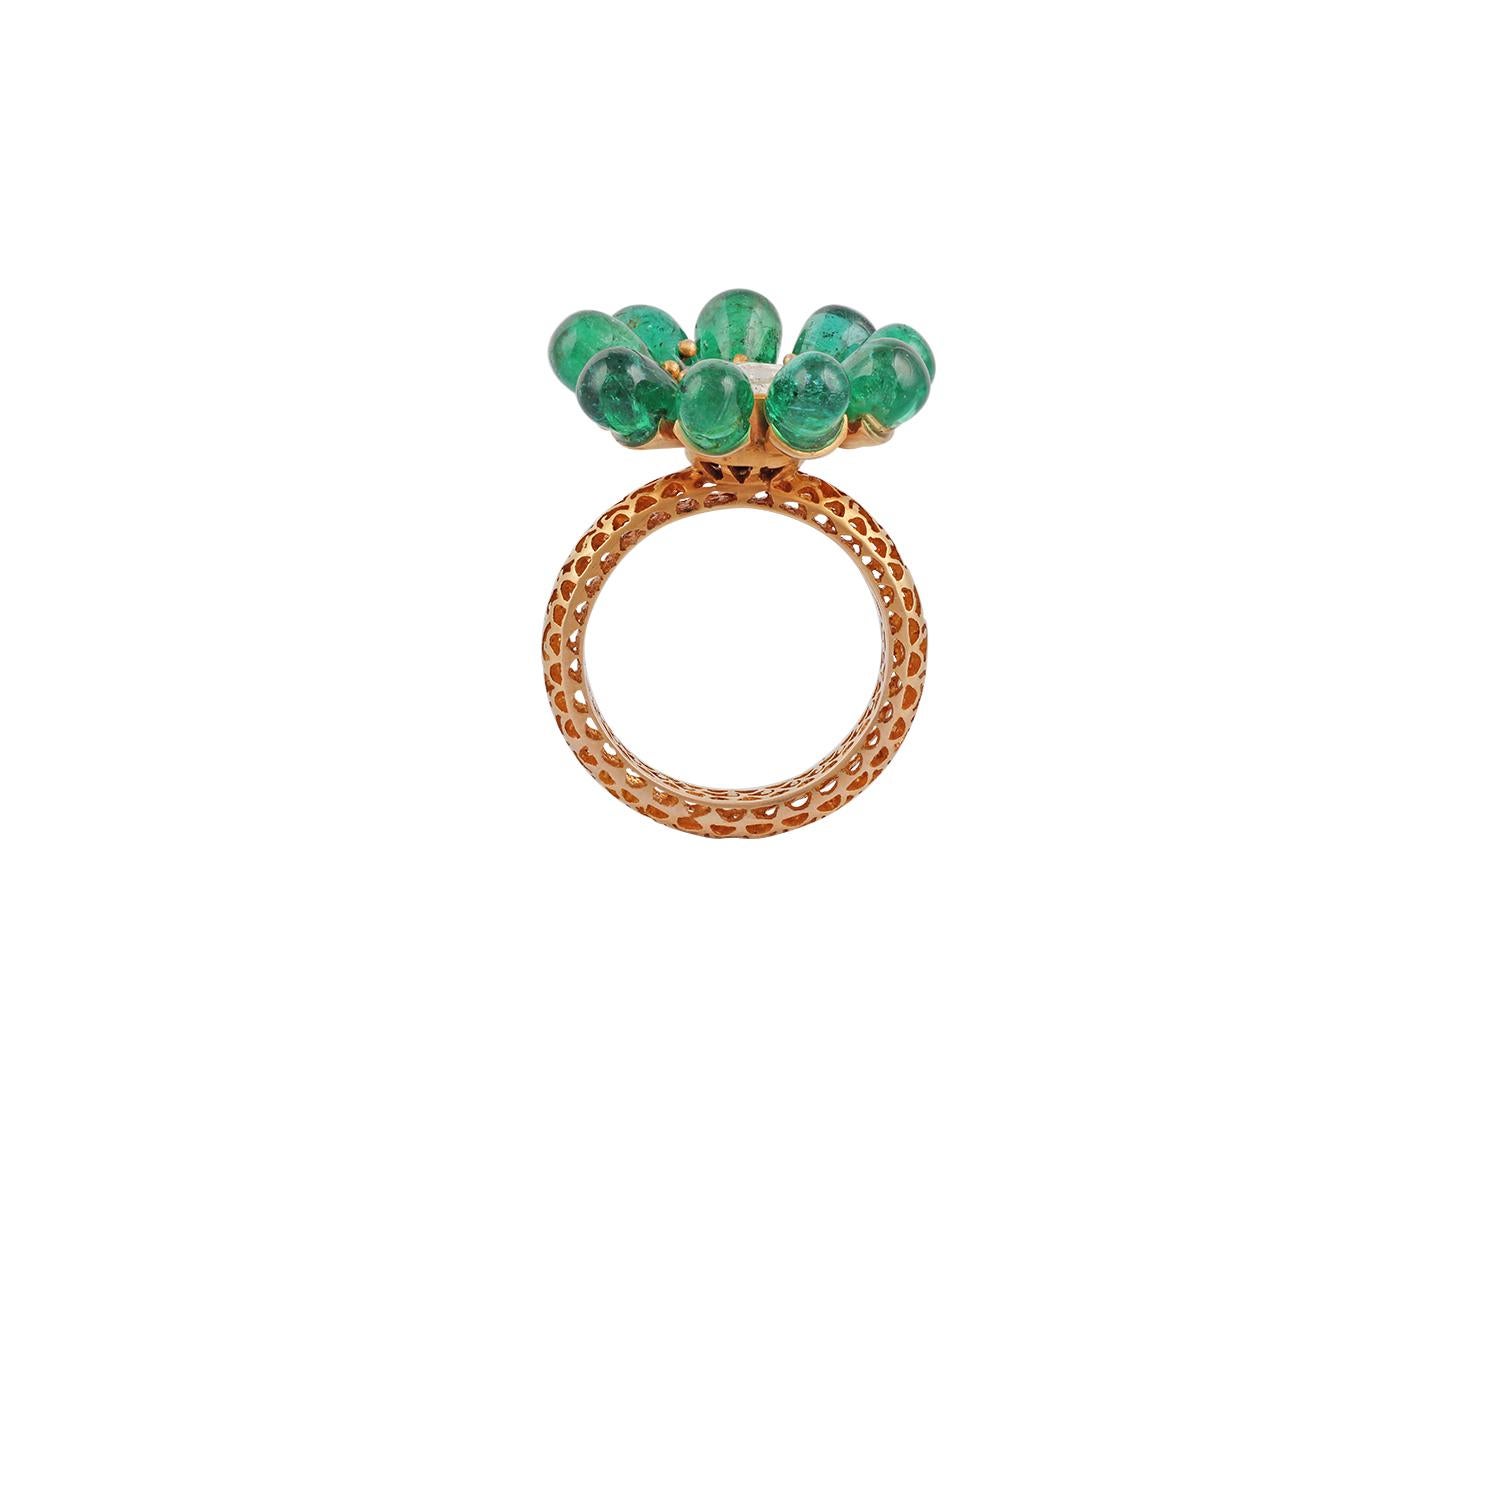 This is a designer drop-shaped fine emerald & rose cut diamond ring studded in 18k yellow gold, features 9 pieces of emerald weight 10.40 carats, 1 piece of rose-cut diamond weight 1.06 carat the total weight of gold in the ring is 5.28 grams, The